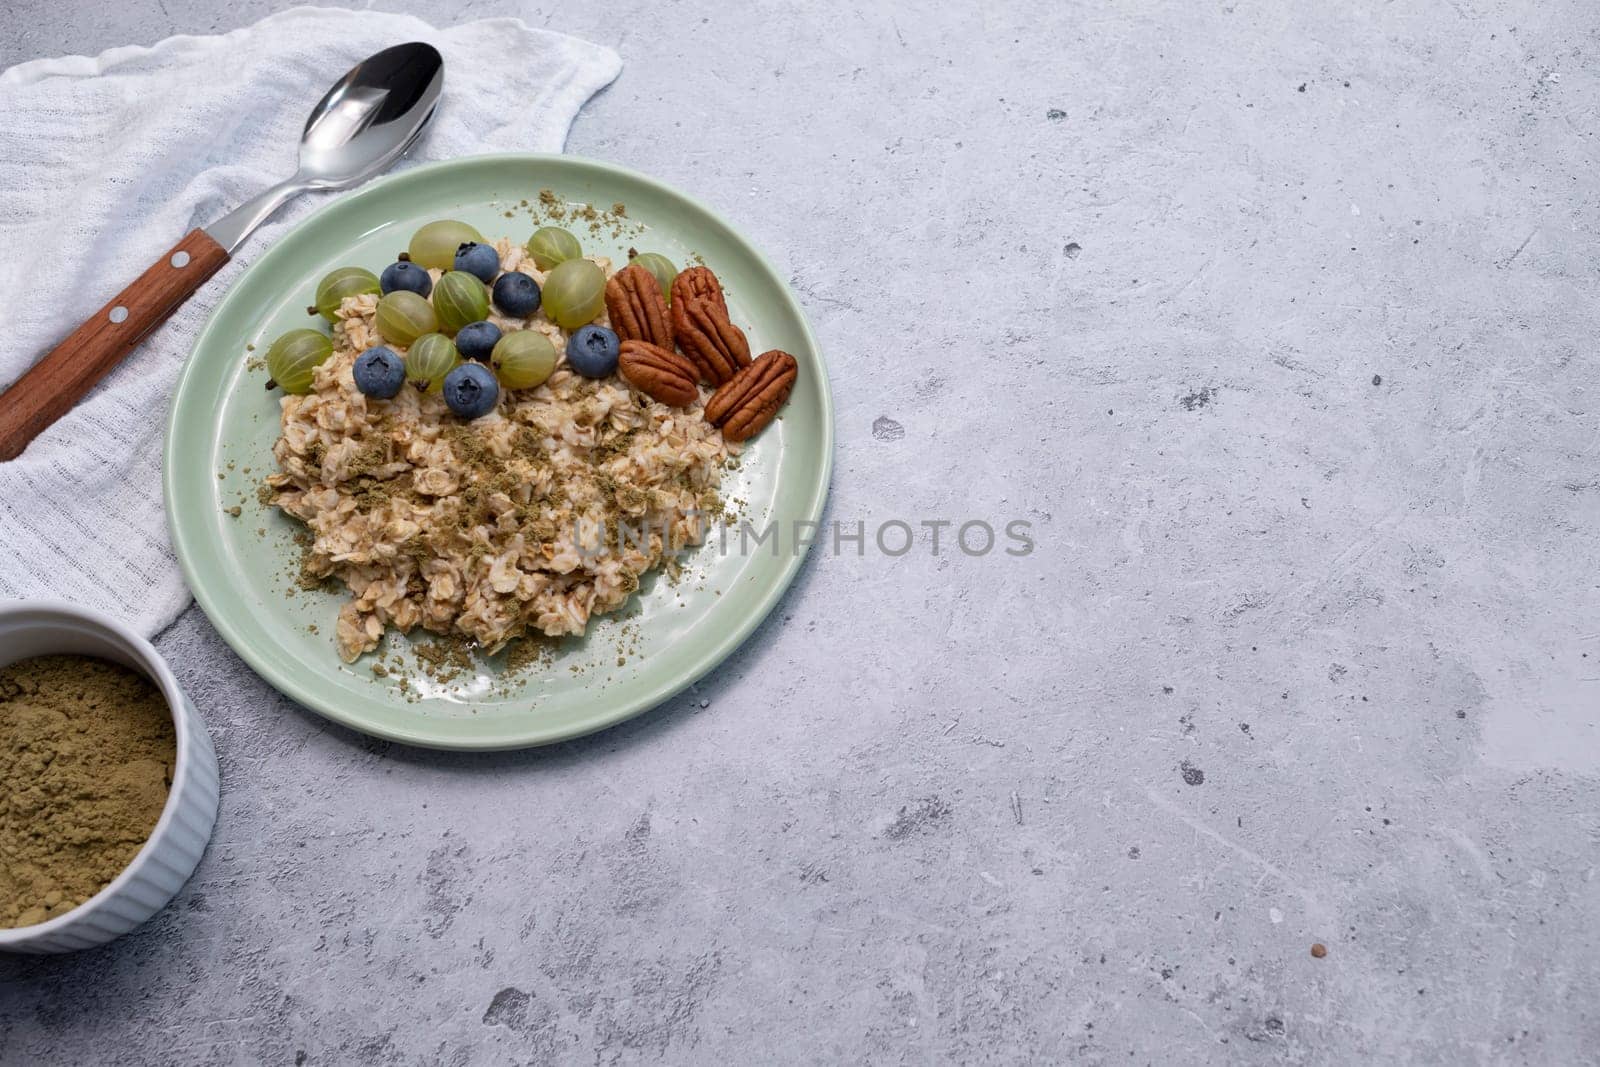 Top View Oatmeal Porridge With Hemp Protein Powder, Nuts, Berries, Bowl With Plant-derived Protein From Cannabis Plant, Spoon. Copy Space. Healthy Breakfast, Meal. Superfood. Horizontal Plane.